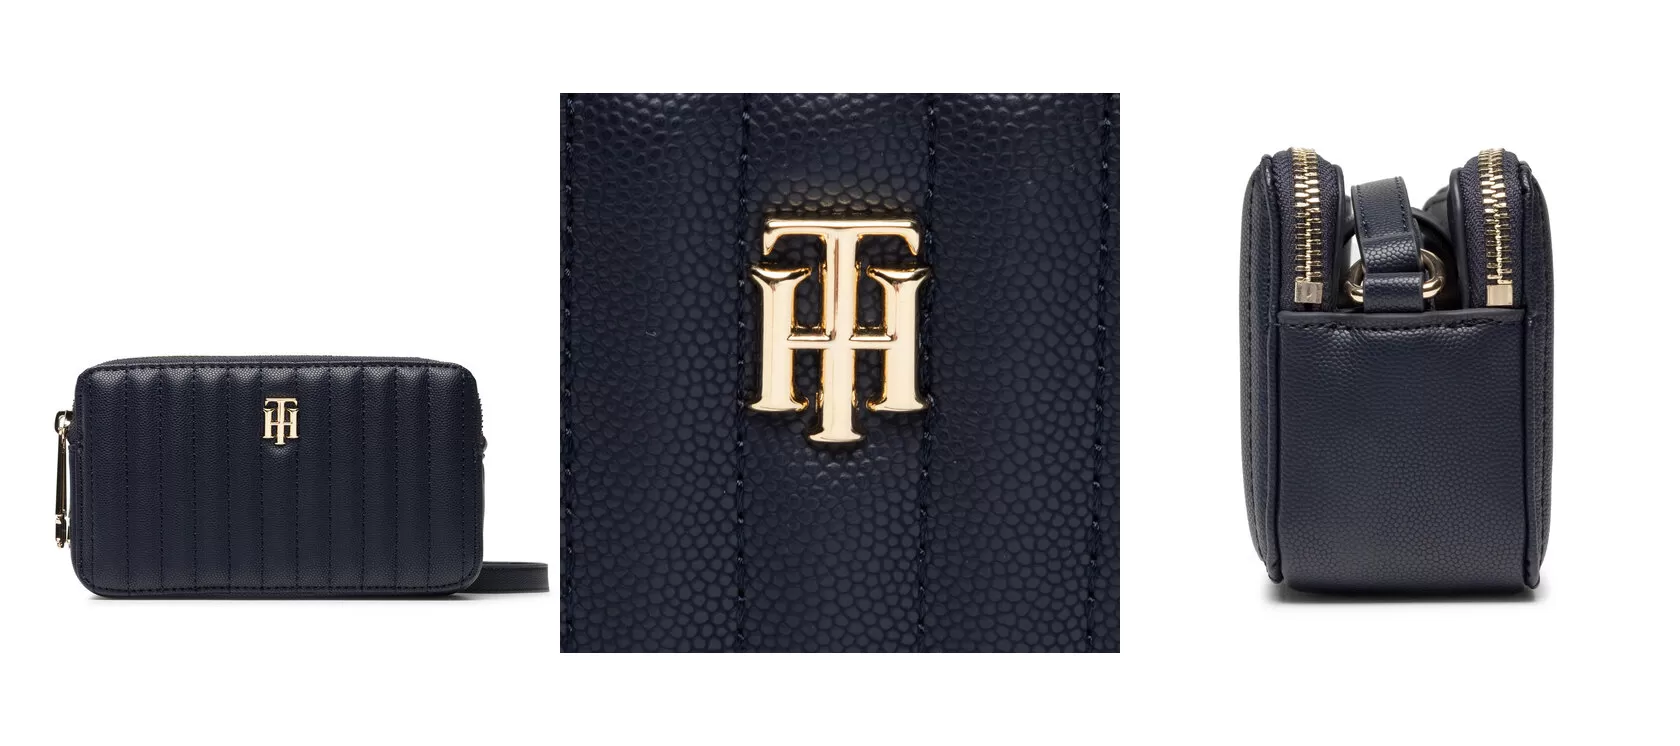 Tommy Hilfiger Torebka Th Timeless Camer Bag Quilted AW0AW13143 Granatowy